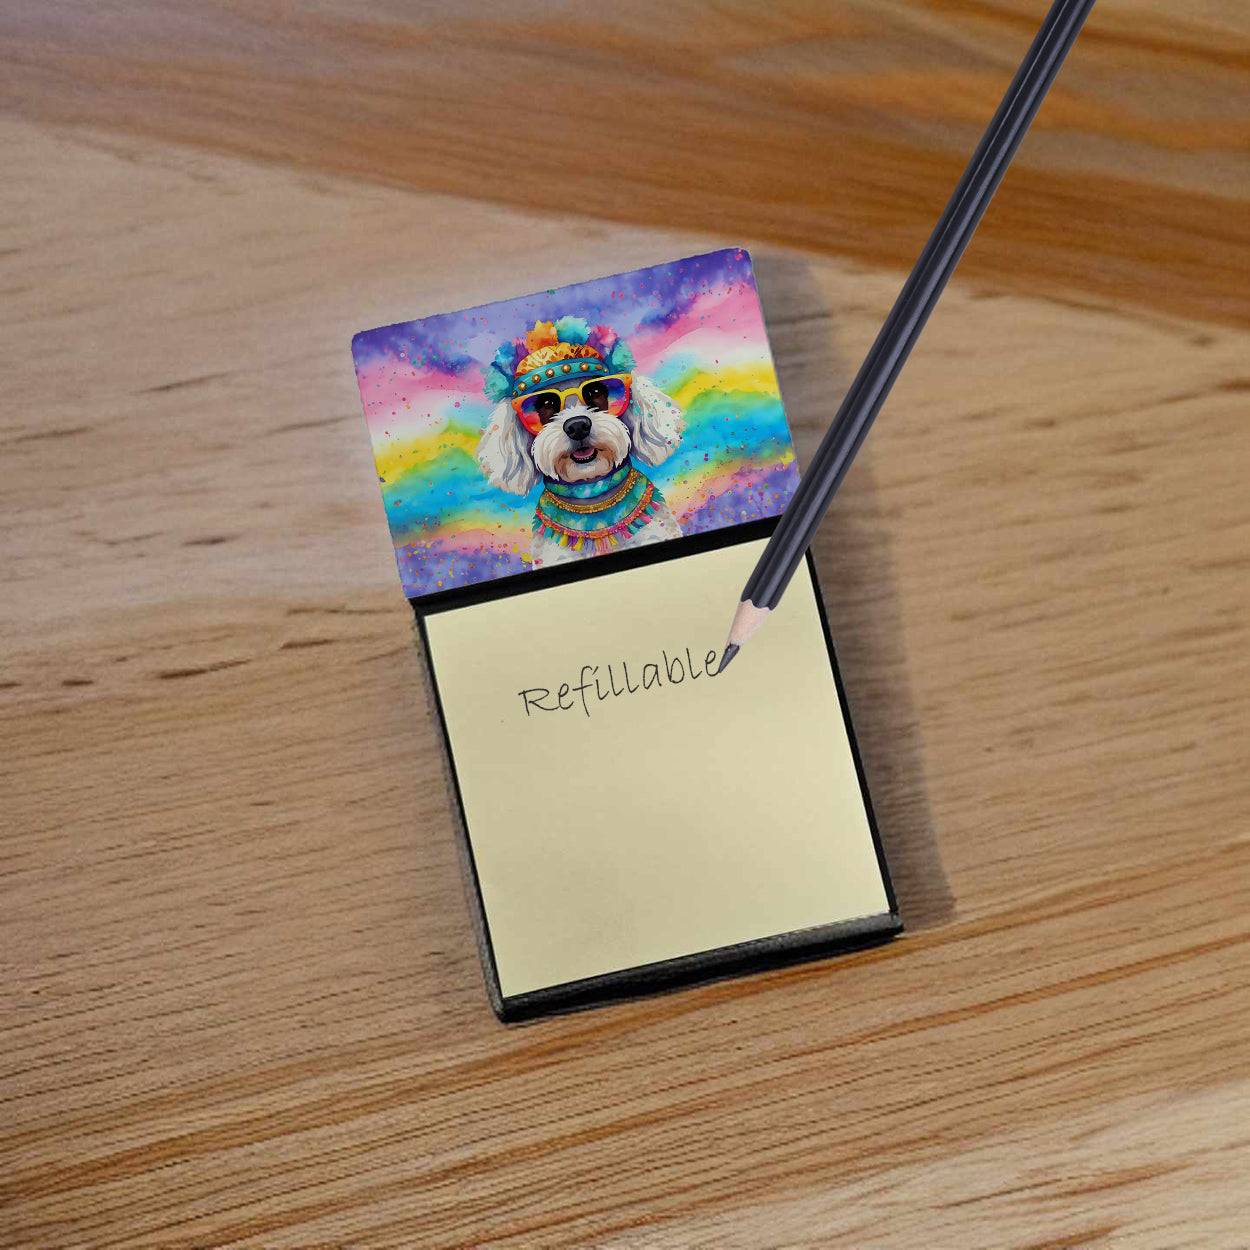 Buy this Bichon Frise Hippie Dawg Sticky Note Holder